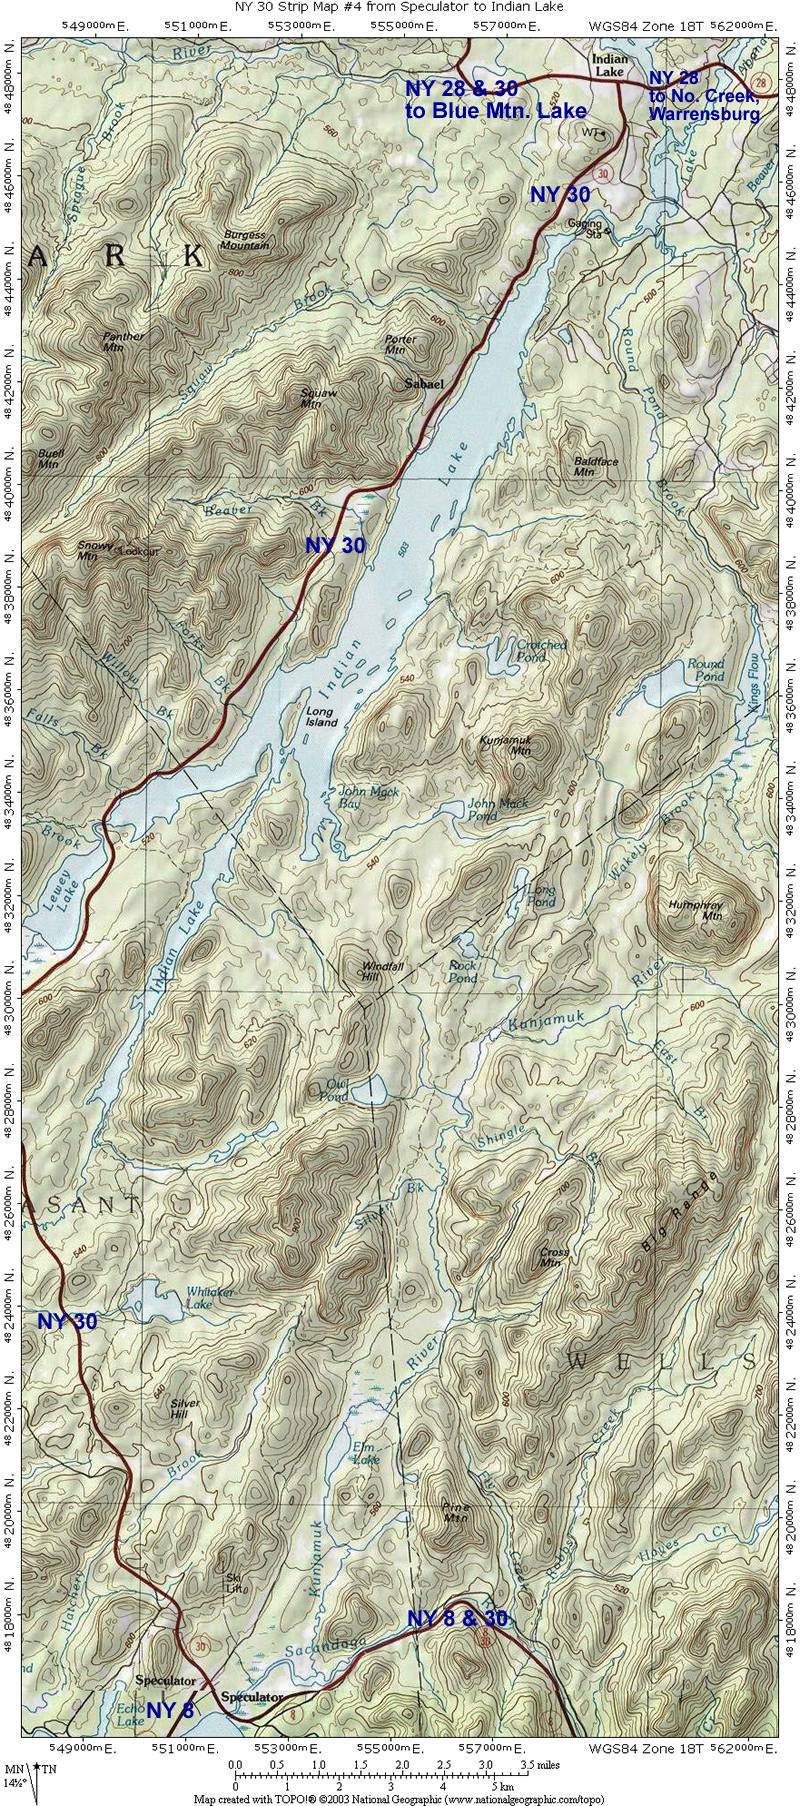 Road Map #4; from Speculator to Indian Lake